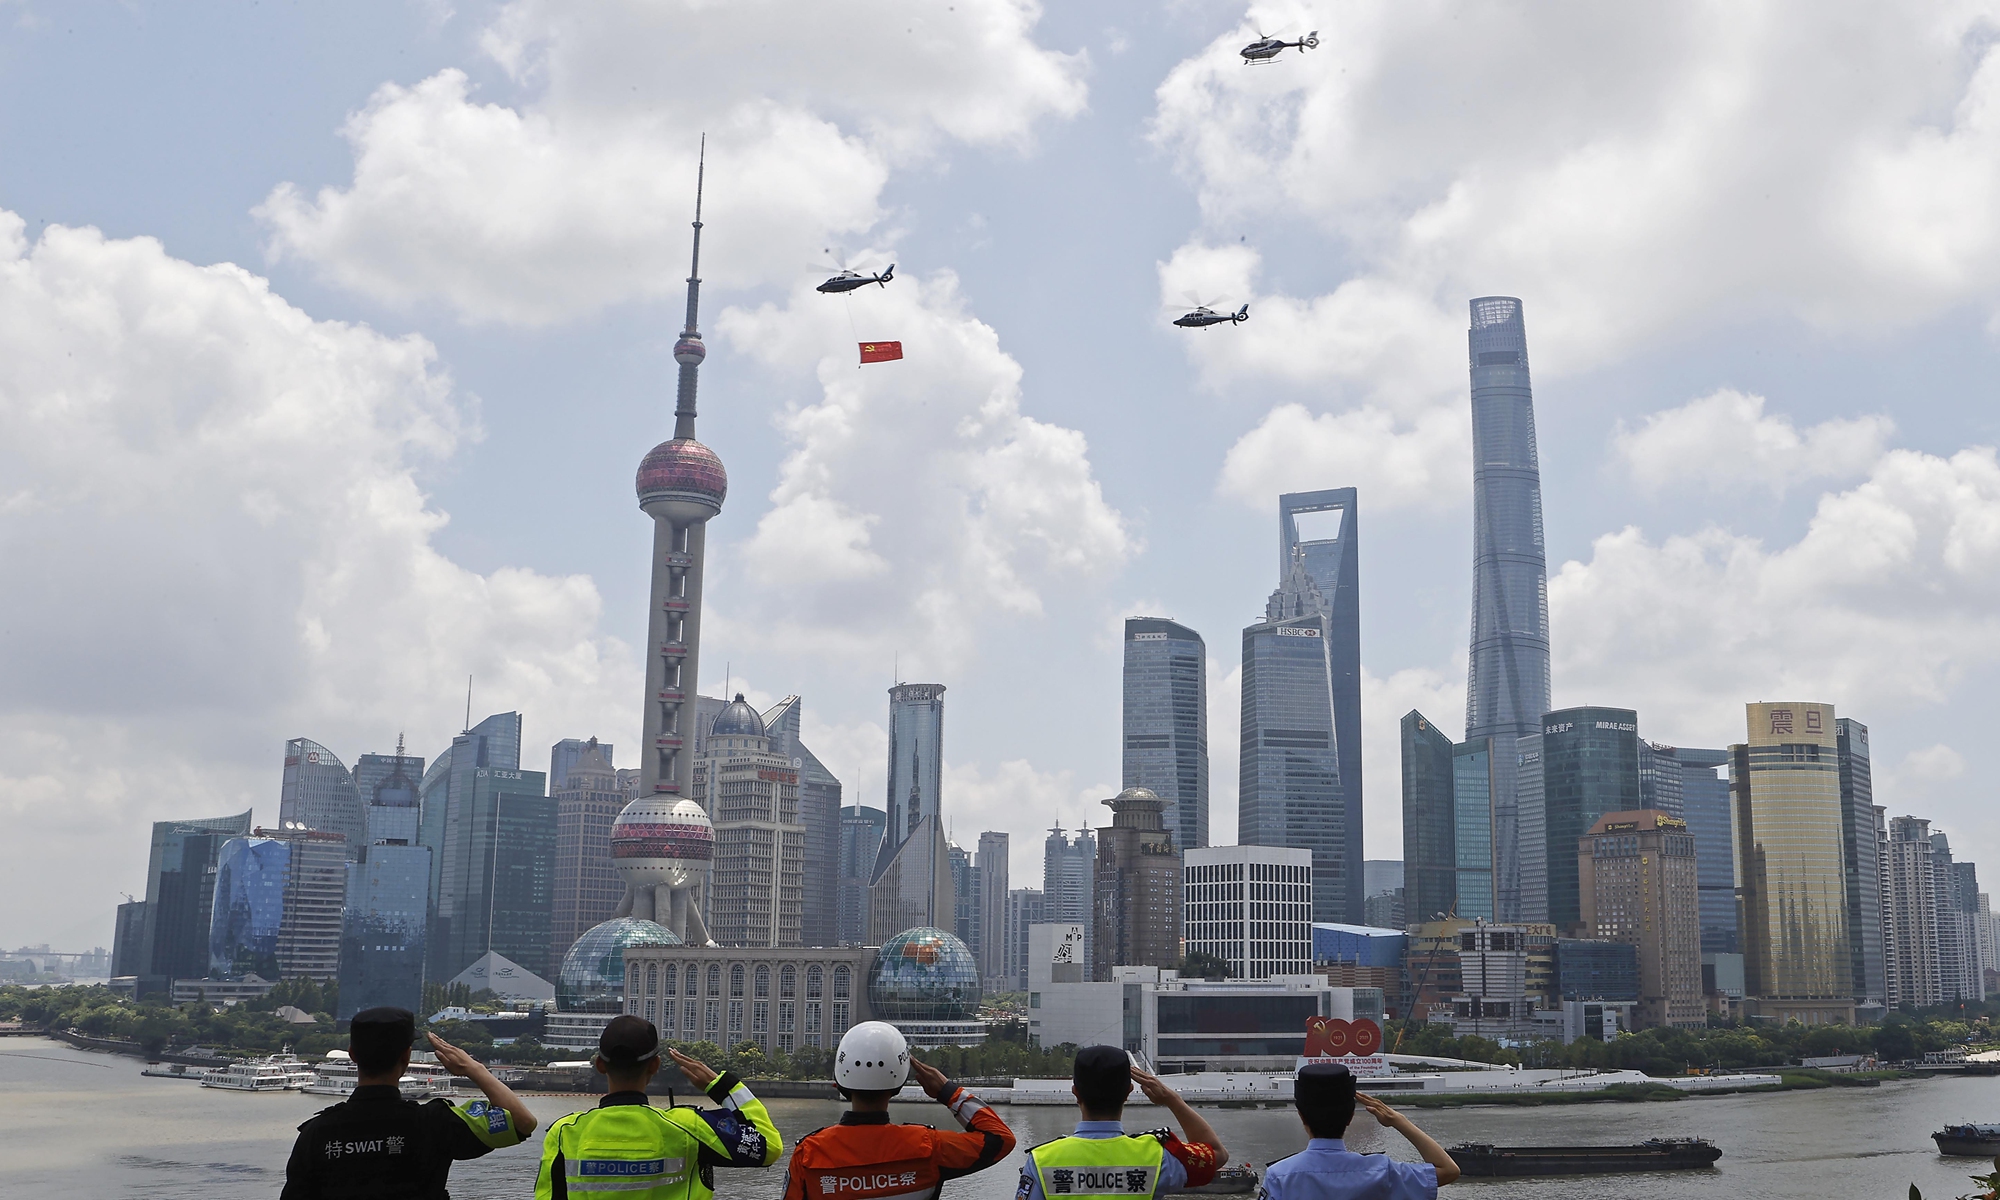 Three police helicopters of the Shanghai Public Security Bureau fly a Party flag over the Huangpu River to celebrate the CPC's centennial in Shanghai on Thursday. Photo: cnsphoto